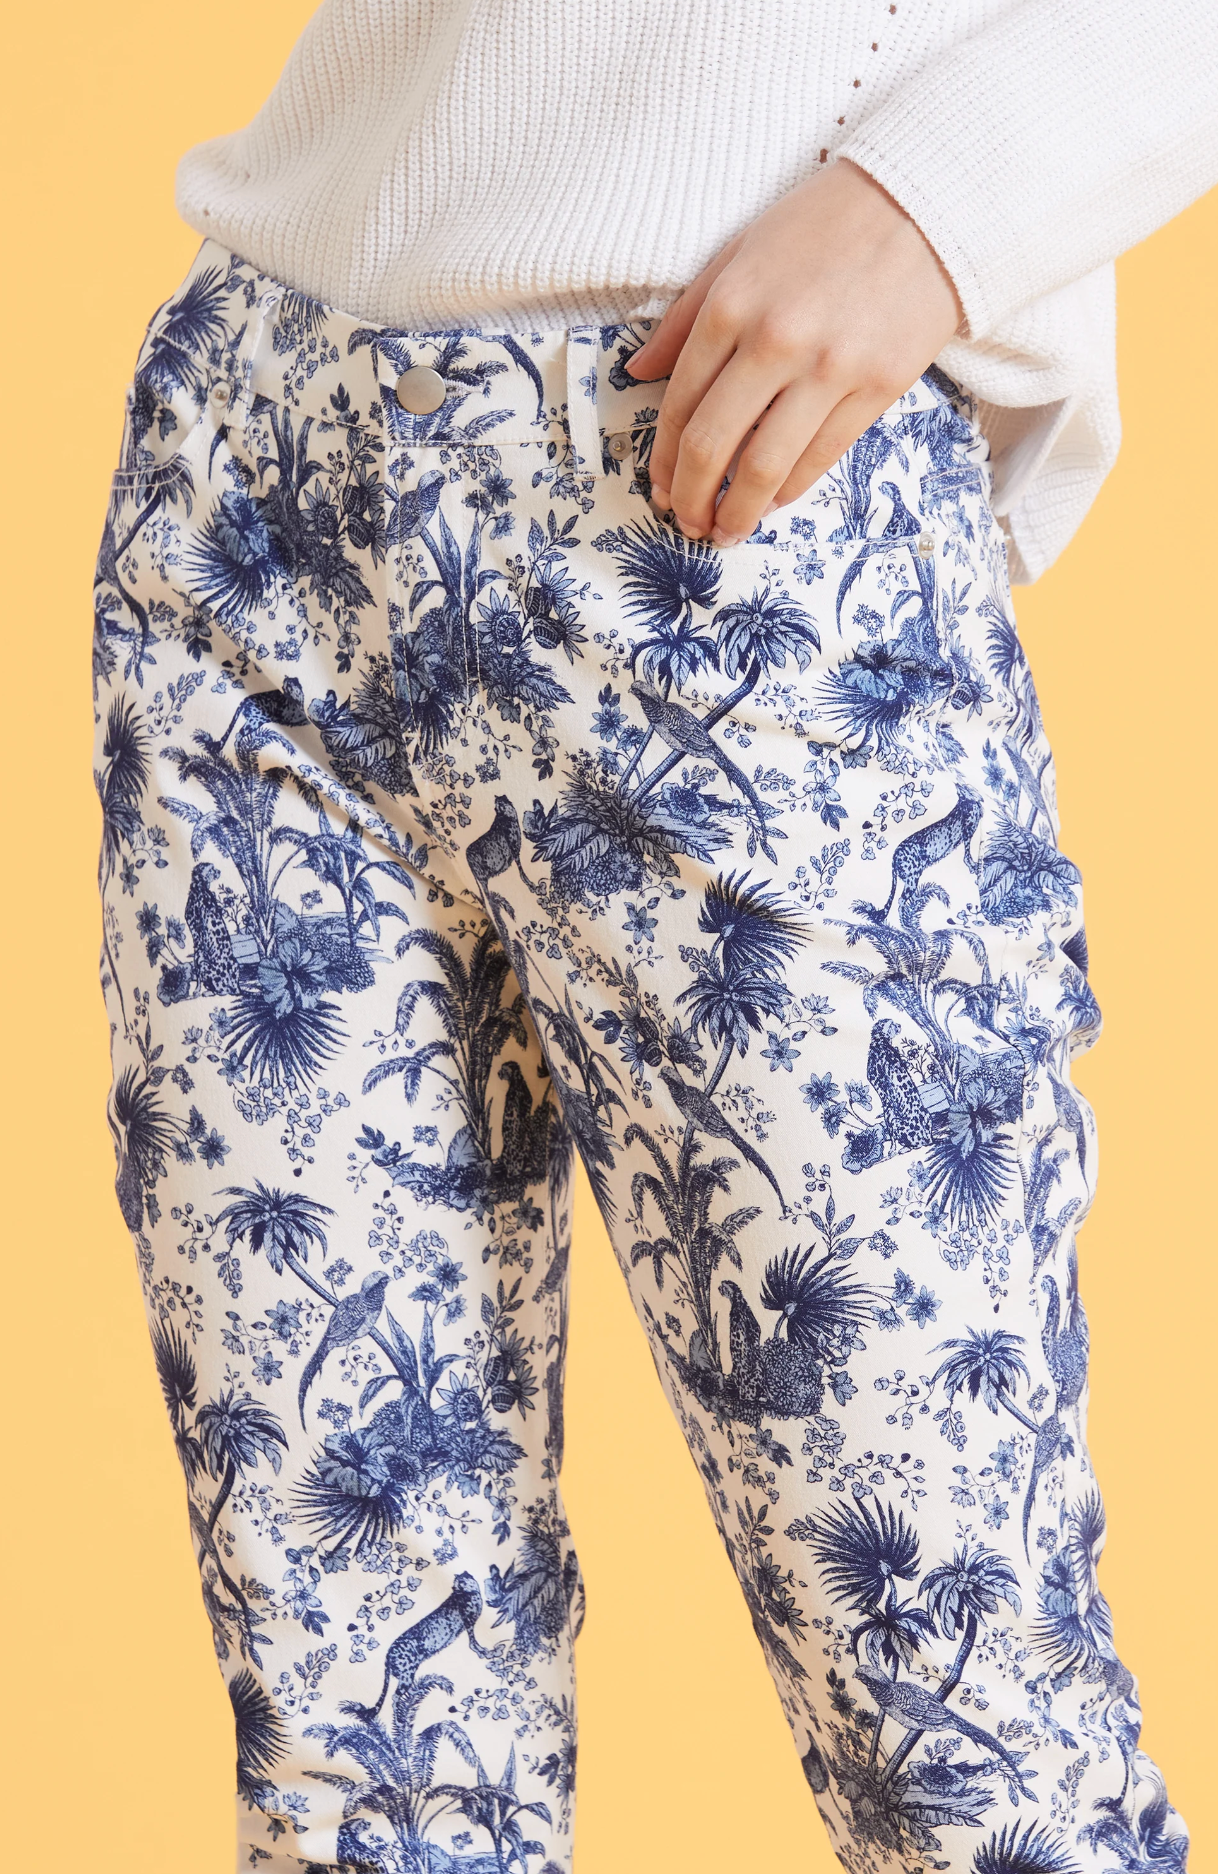 Twill Frayed Toile Jean - The French Shoppe